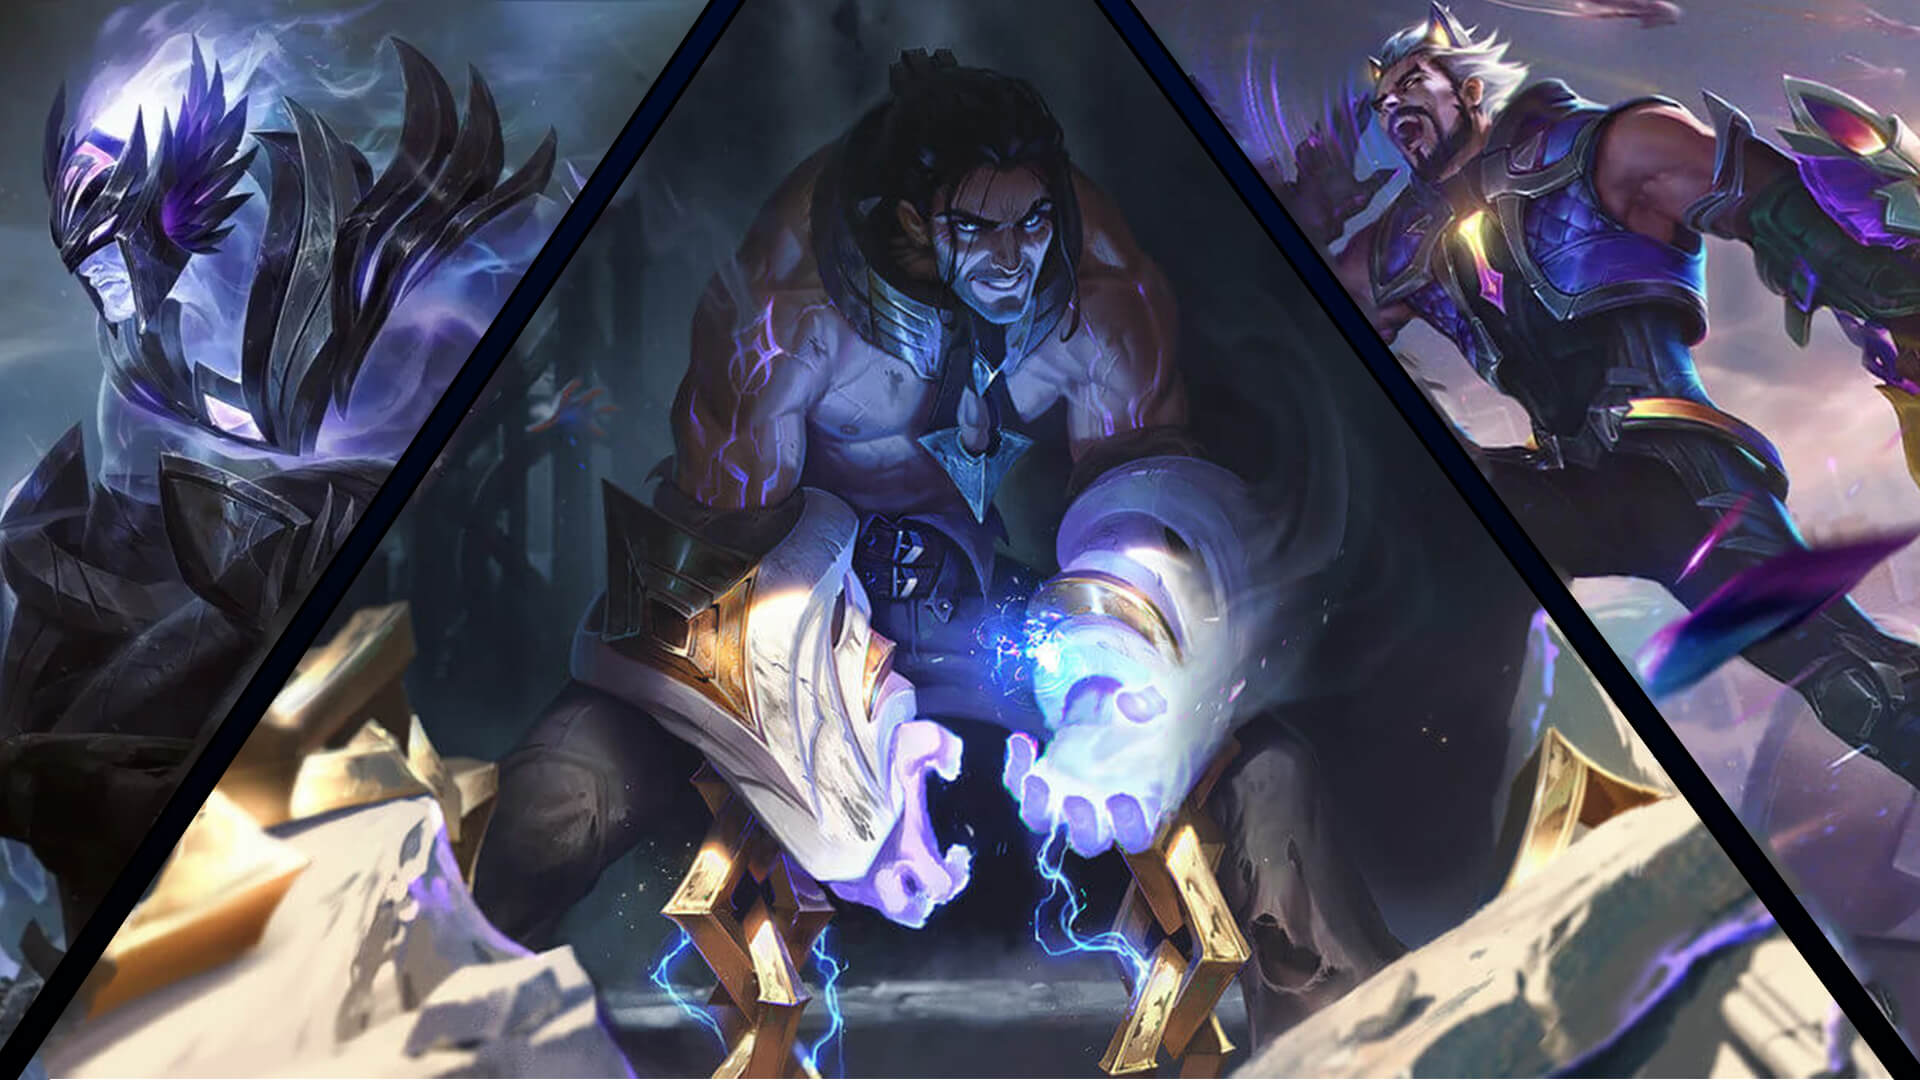 Classic Sylas the Unshackled in the middle, Ashen Slayer Sylas to the left and Battlewolf Sylas to the right